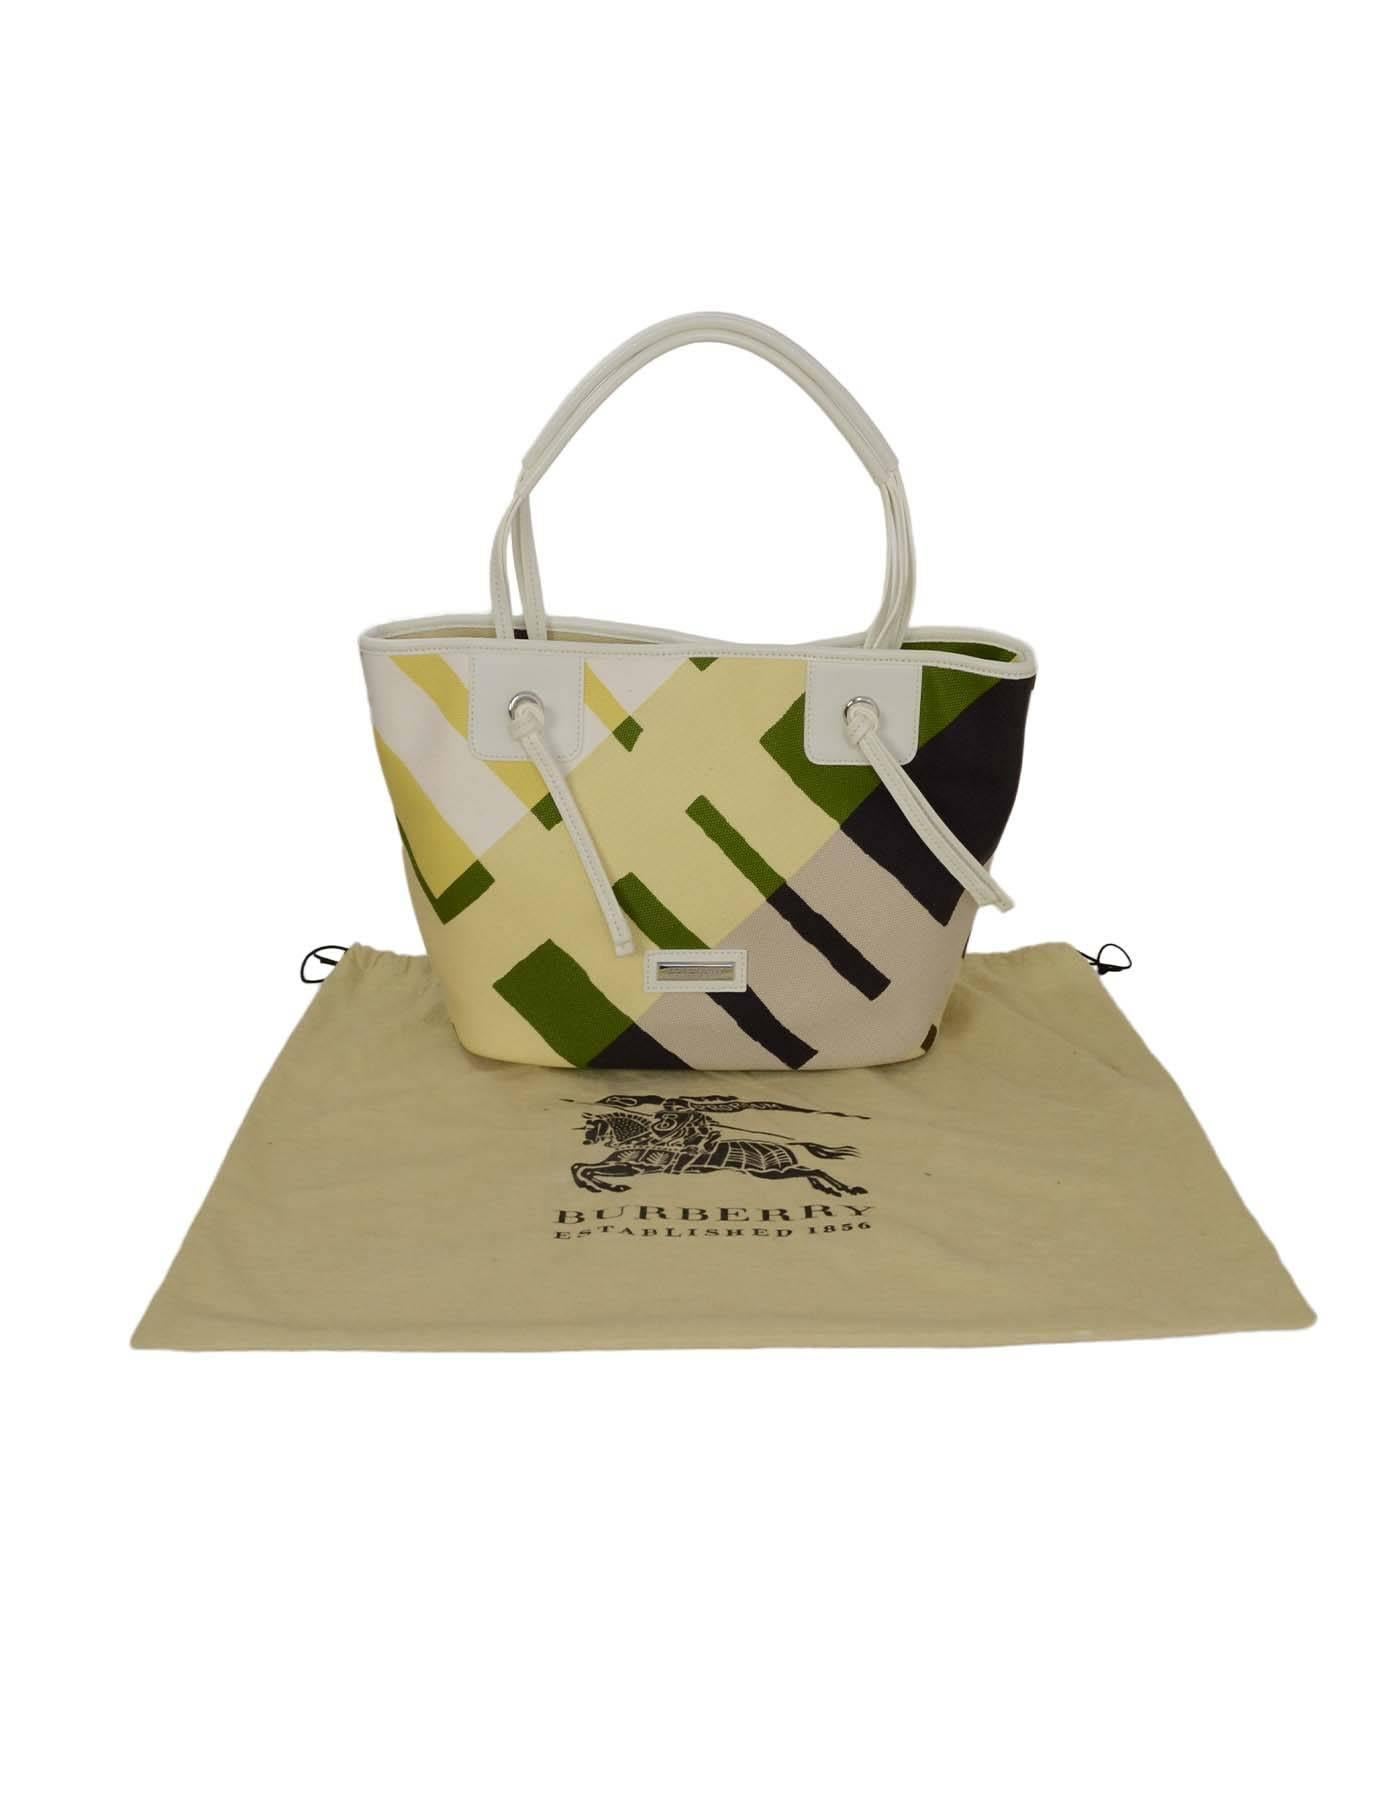 Burberry New Multi-Colored Printed Canvas Tote Bag SHW 3